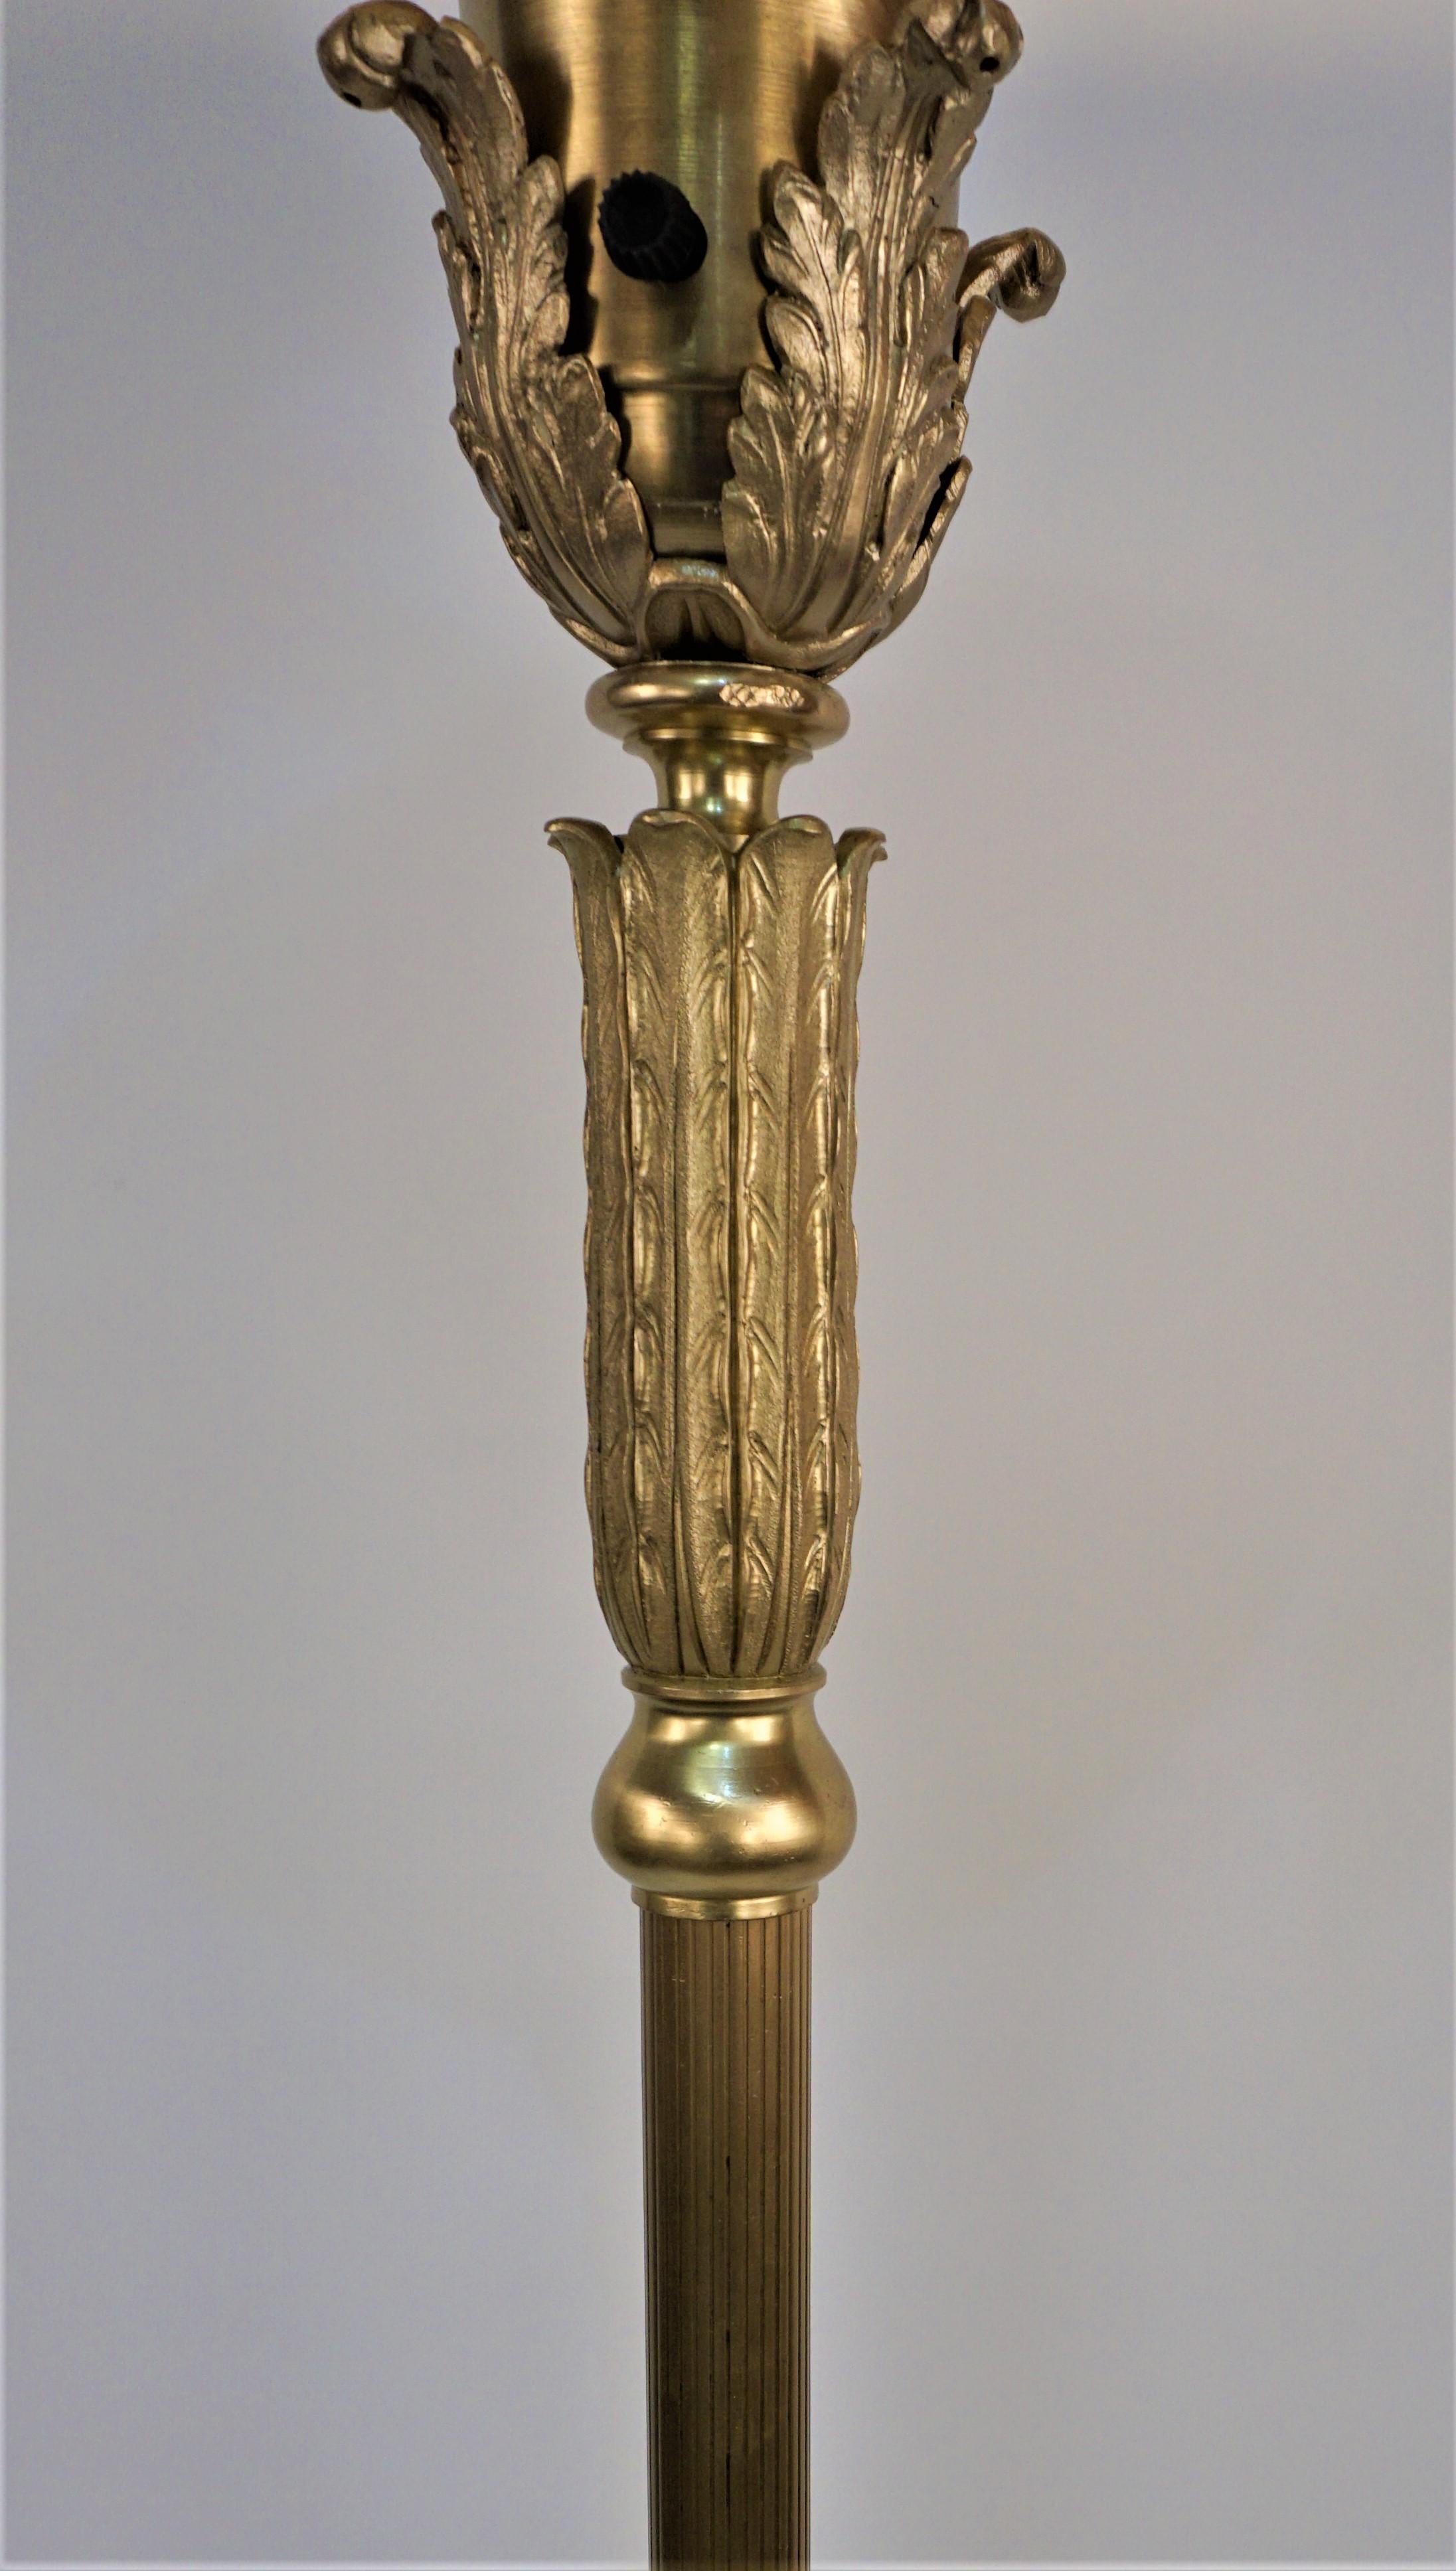 Early 20th Century American Solid Brass Art Deco Torchiere Floor Lamp